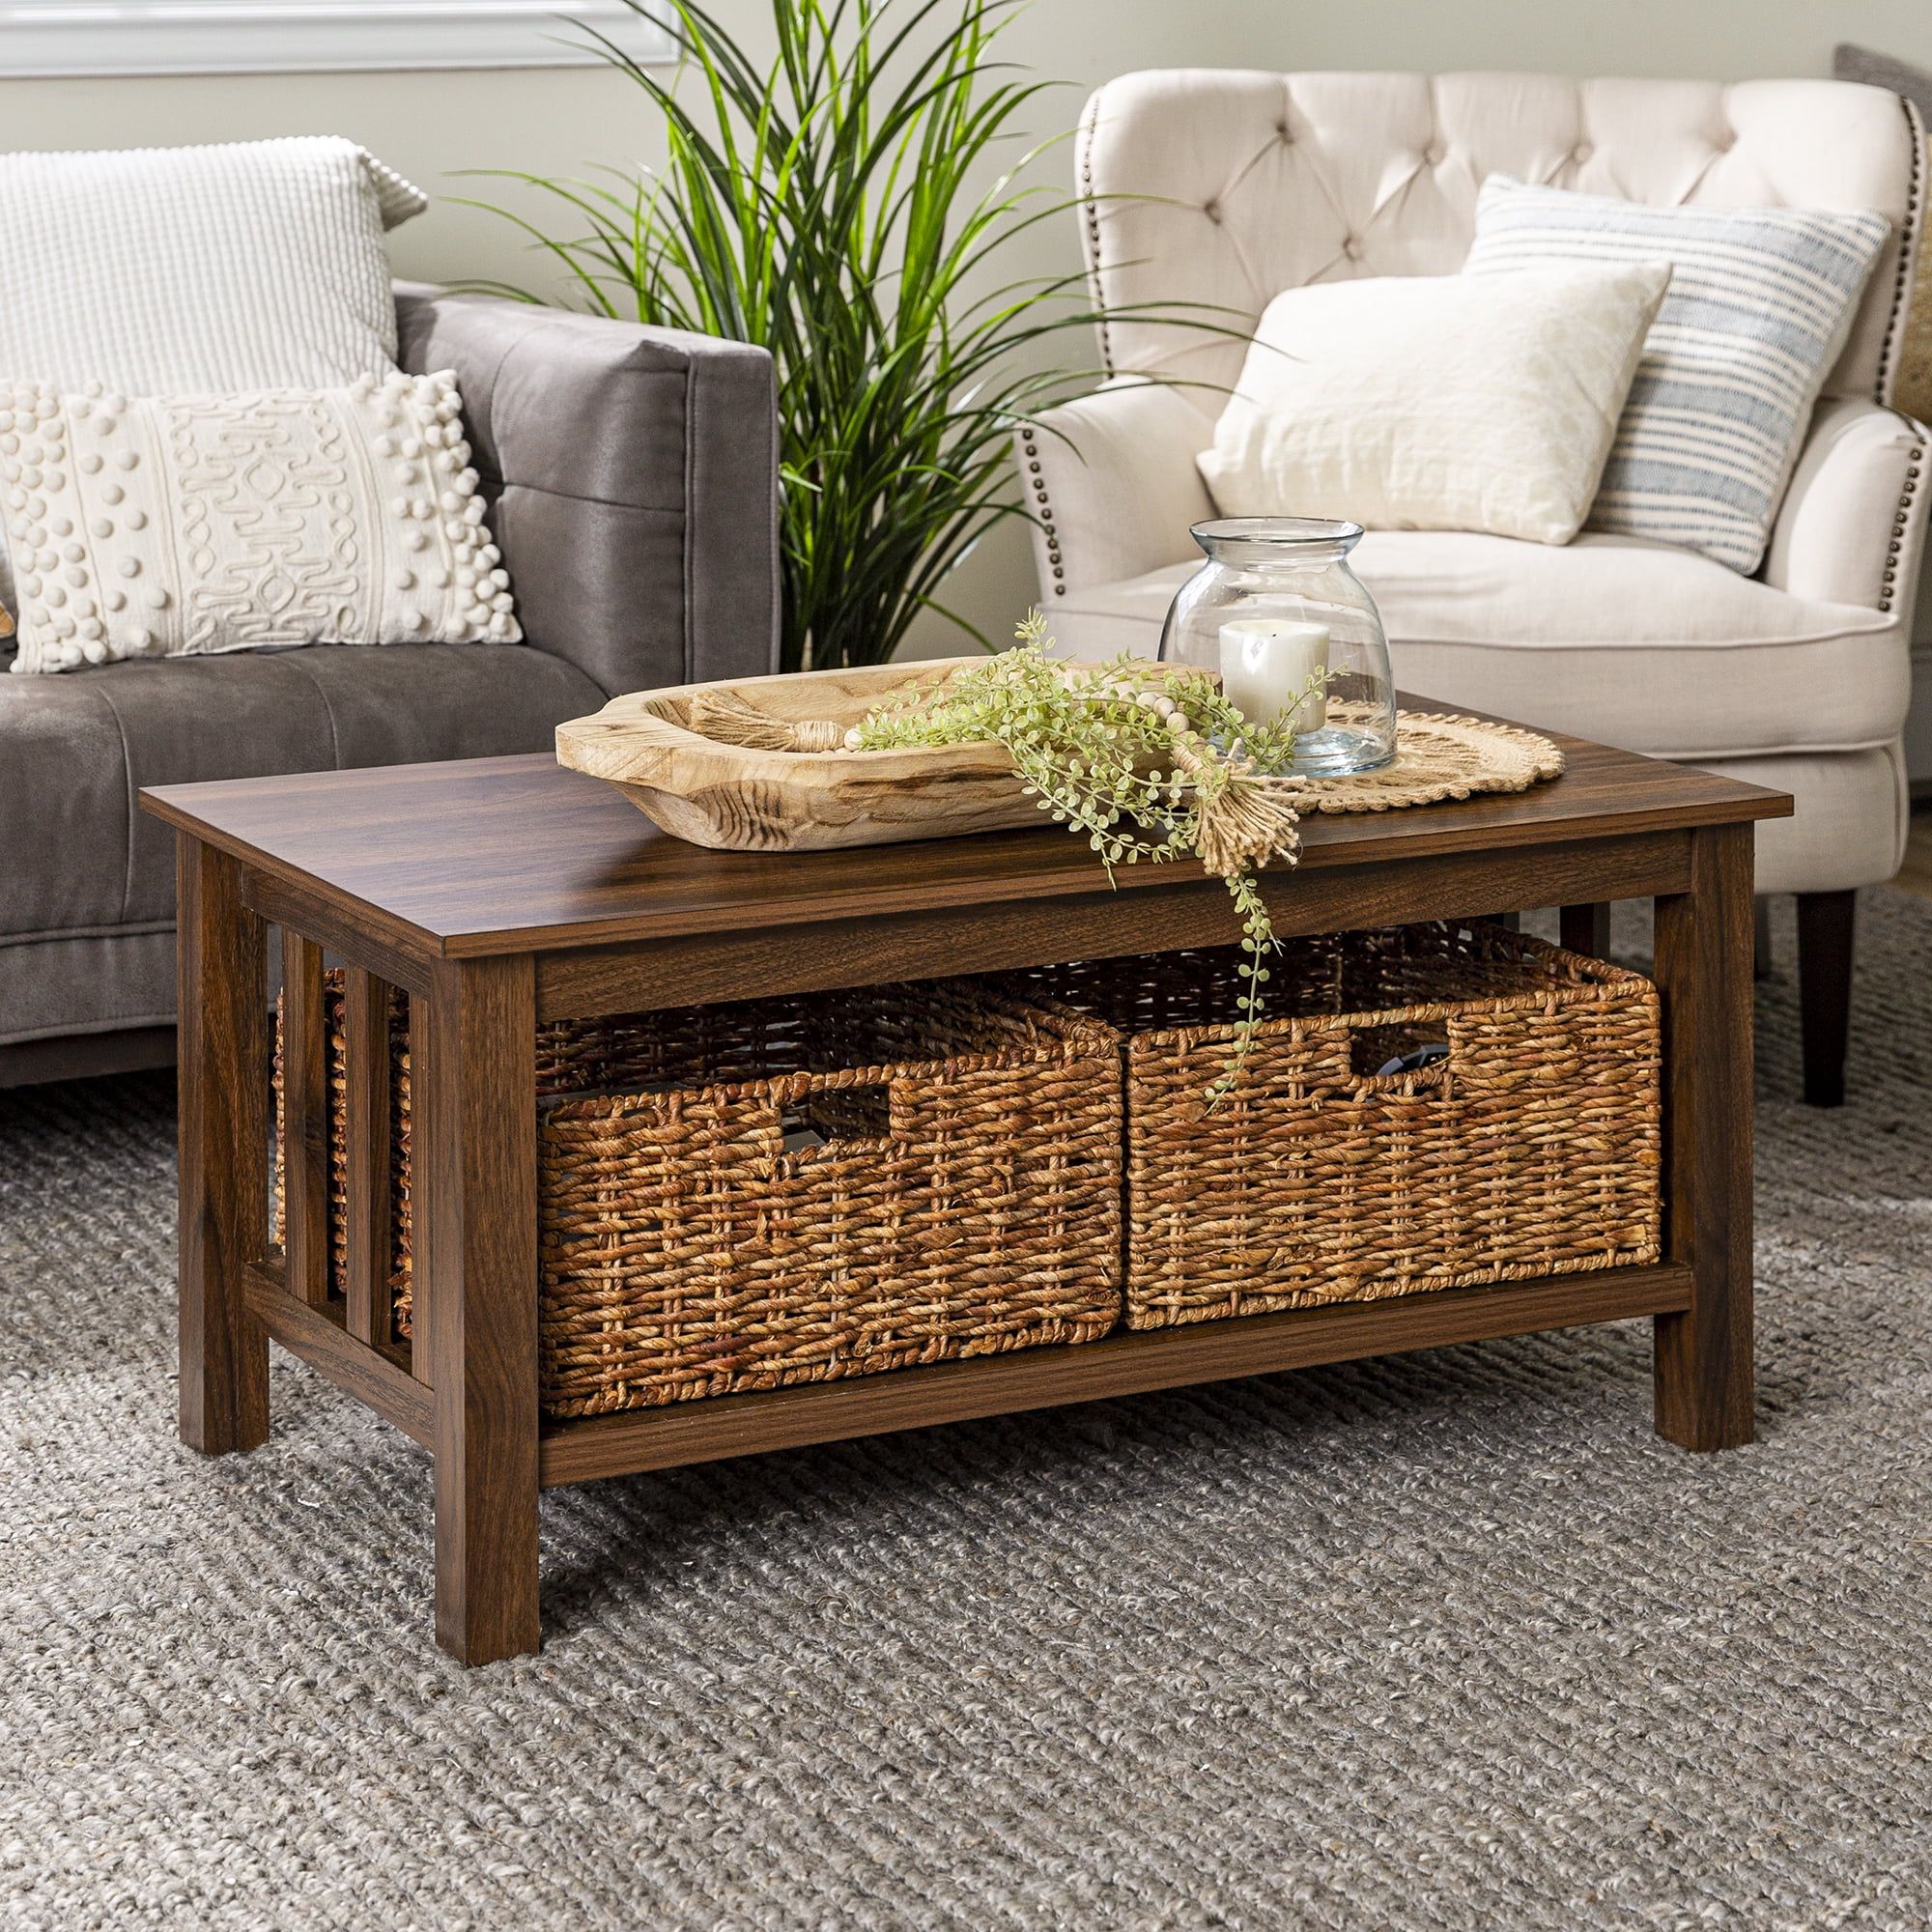 Woven Paths Traditional Storage Coffee Table With Bins, Dark Walnut In Woven Paths Coffee Tables (View 2 of 15)